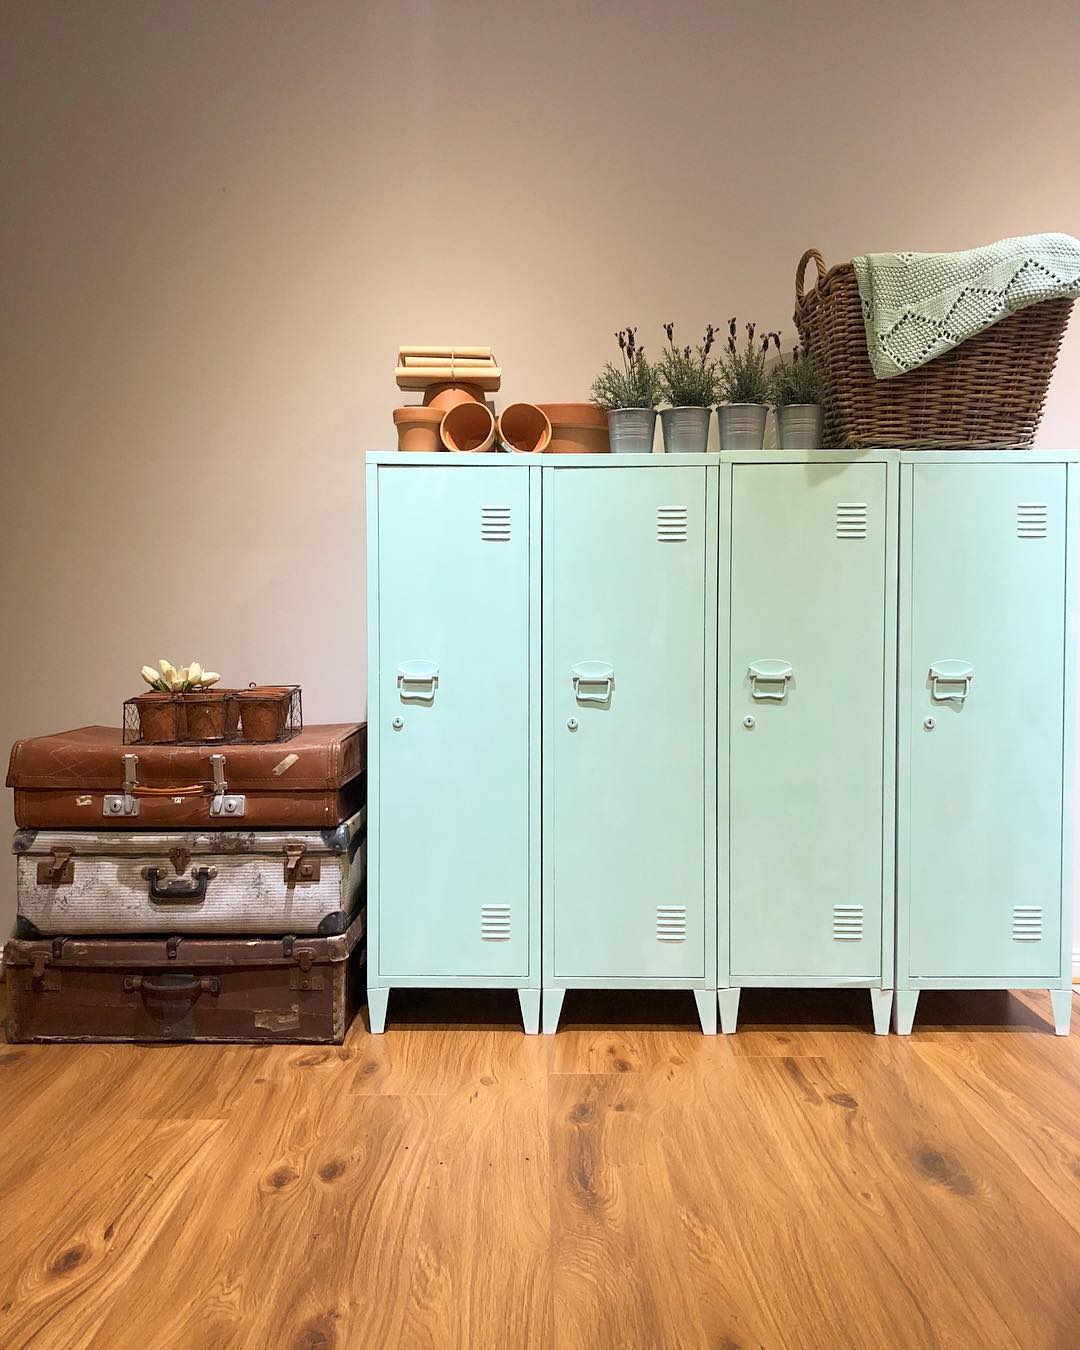 Old Light Blue Lockers Installed in a Basement for Storage. Photo by Instagram user @provincialfarmtouch